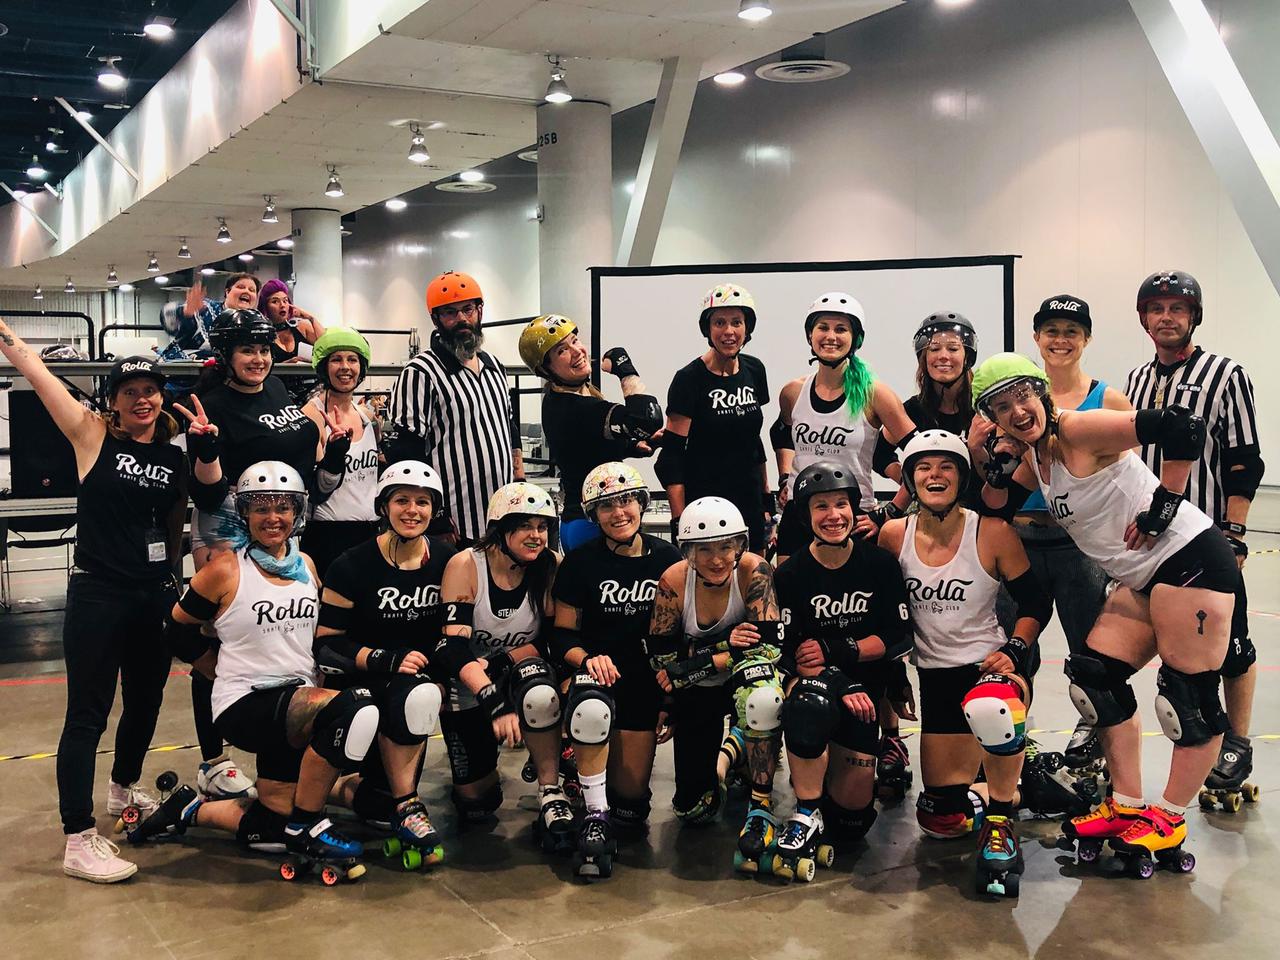 Team photo of the RollaCon 2019 "All Stars" bout roster, and officials. Two rows, front row on one knee. In the background, two people are waving at the camera.